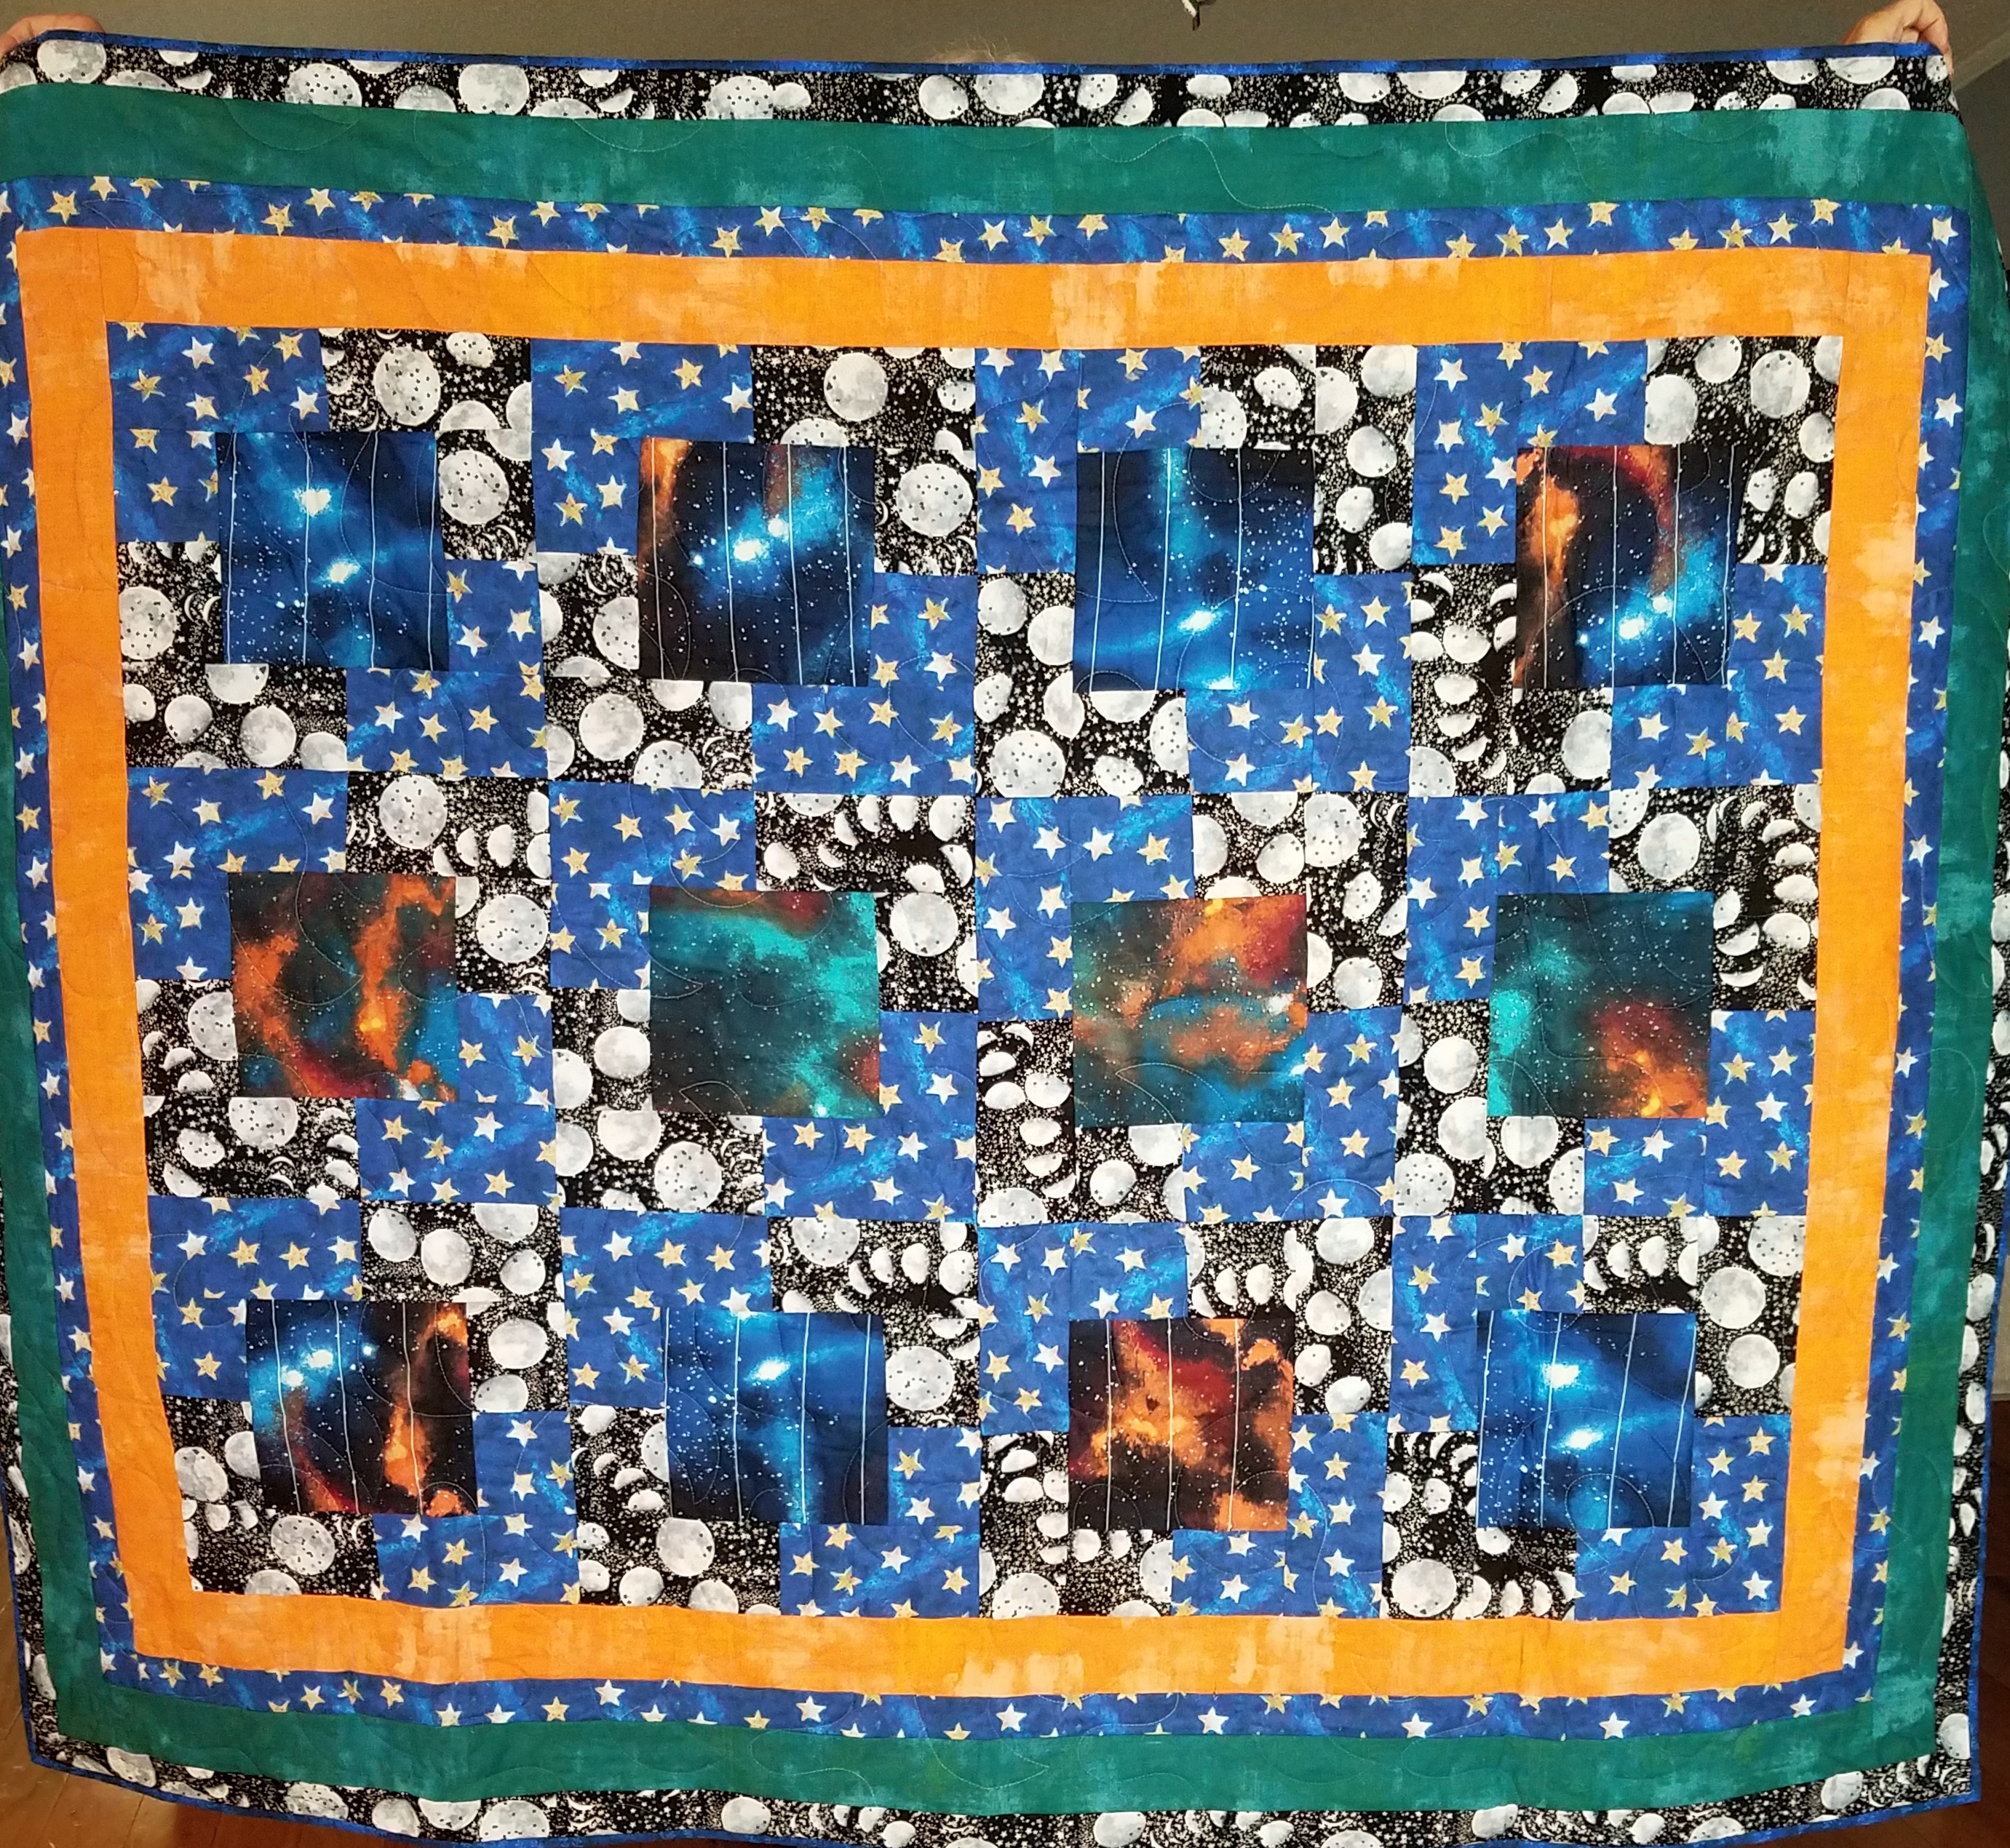 One of the quilts Dorothy made & donated to club events to be auctioned off